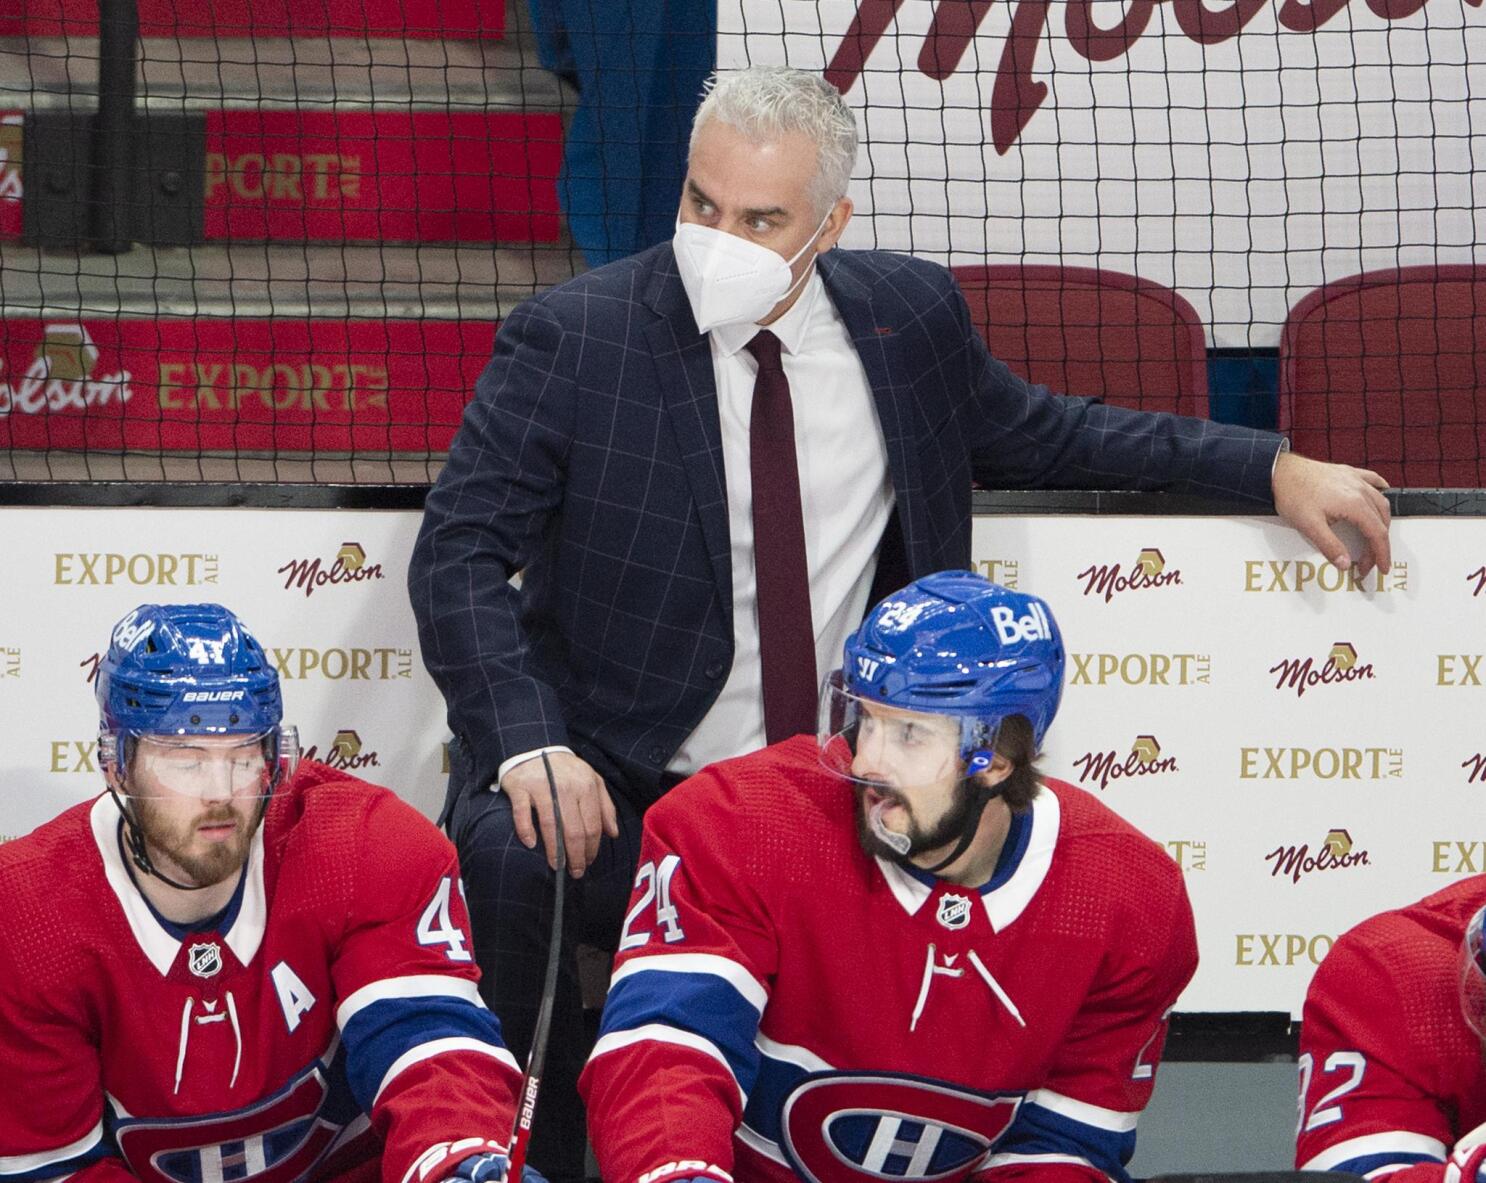 Doctor, what's wrong with me? Seems you're a Montreal Canadiens